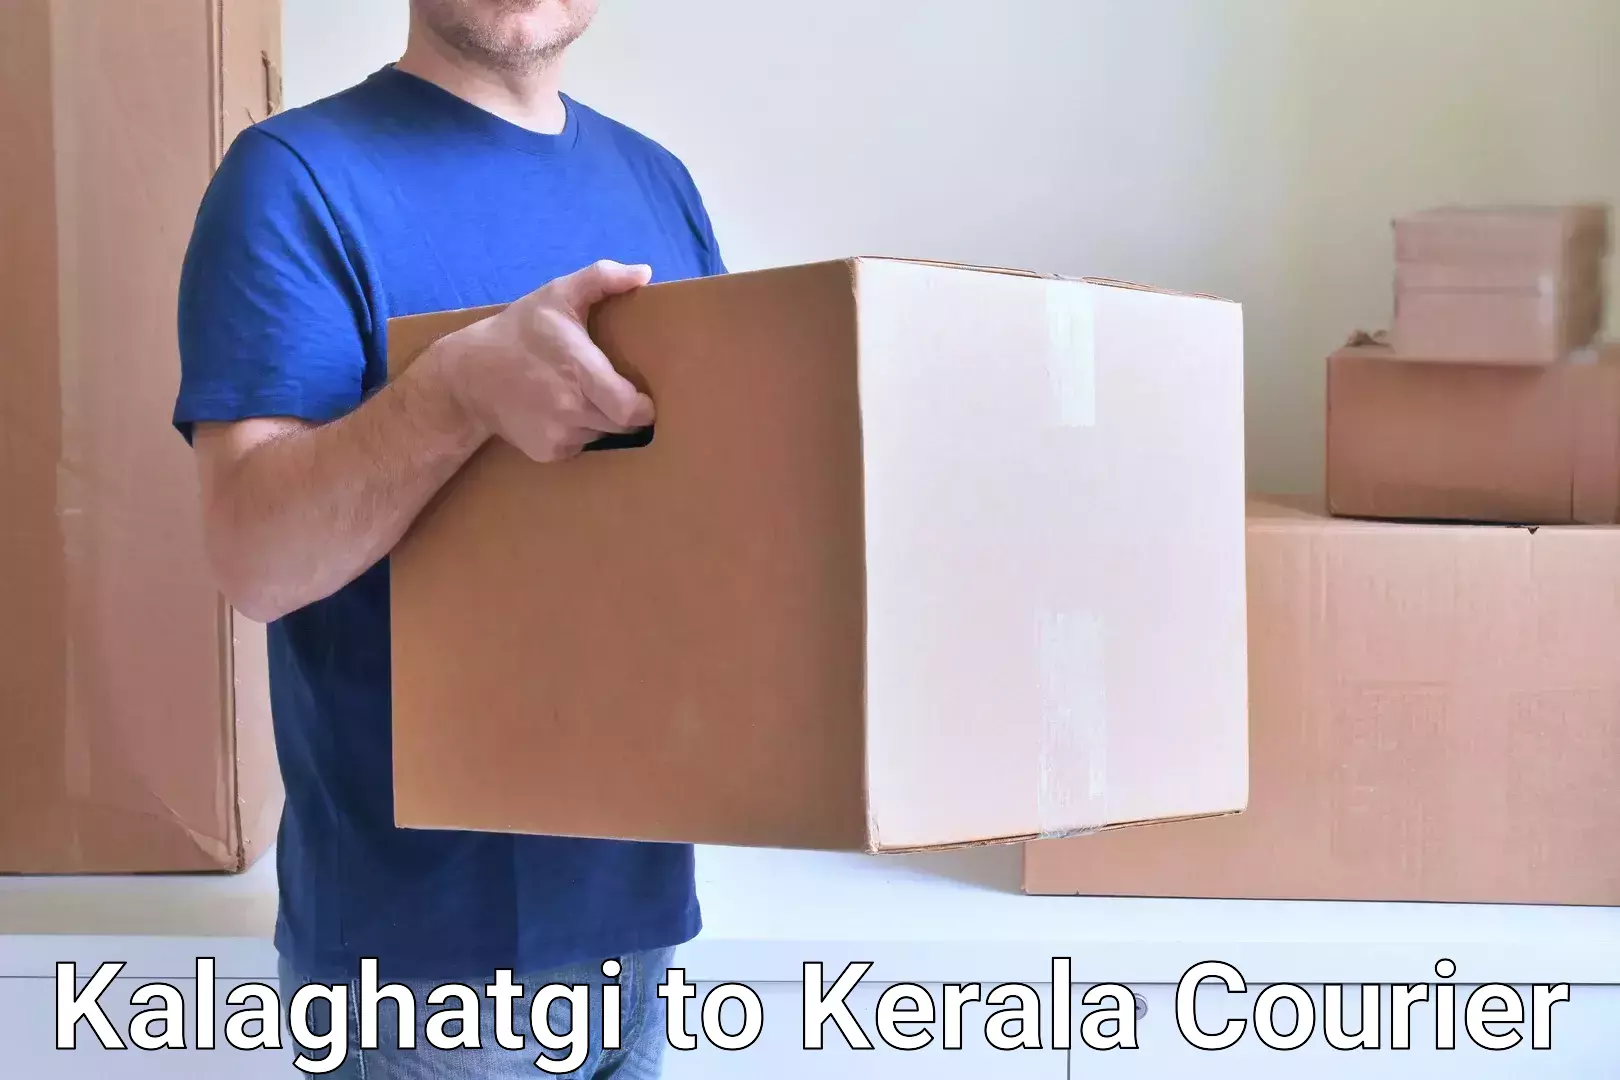 Next-day delivery options Kalaghatgi to Kerala